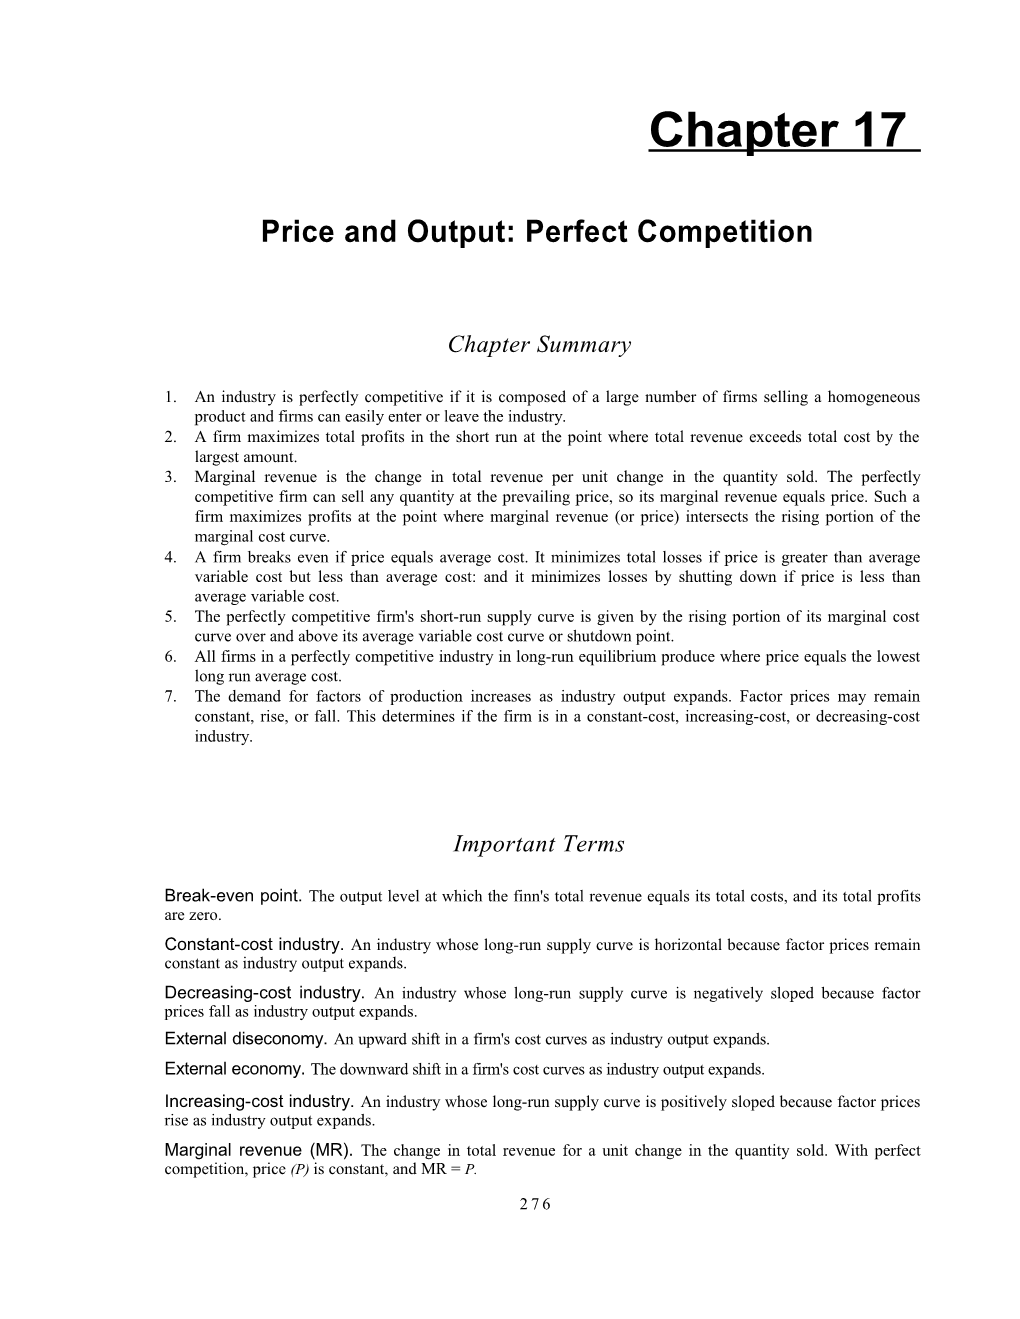 Price and Output: Perfect Competition